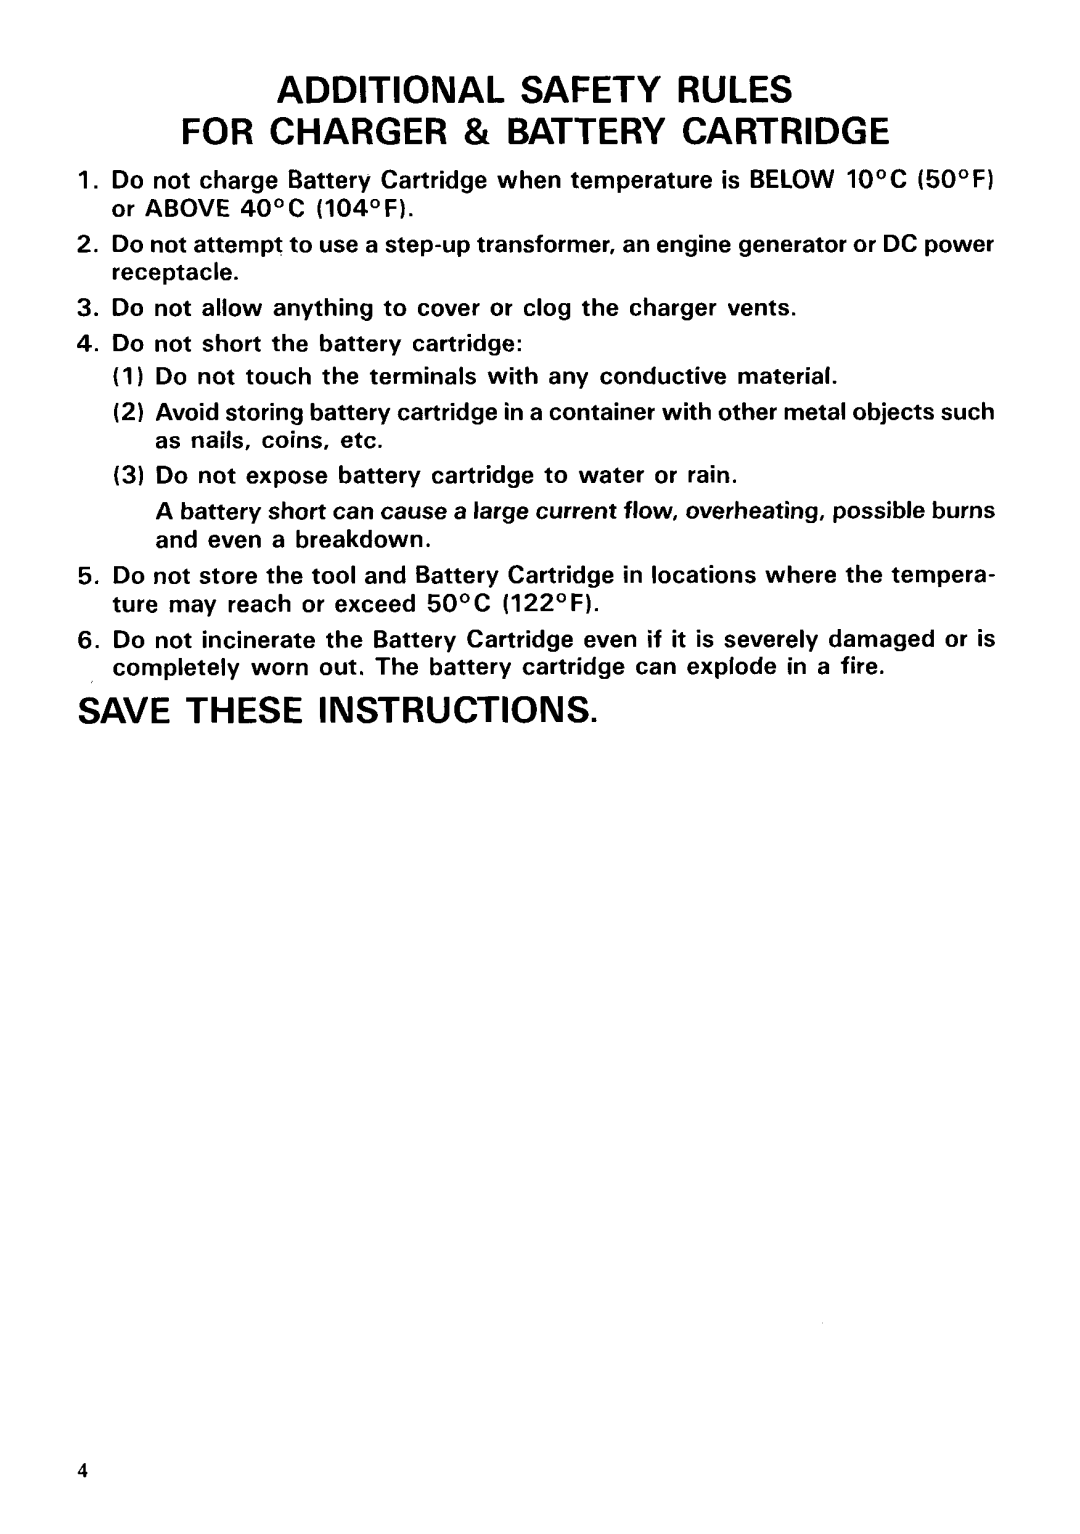 Makita UMLOOODW manual Additional Safety Rules For Charger & Battery Cartridge, Save These Instructions 